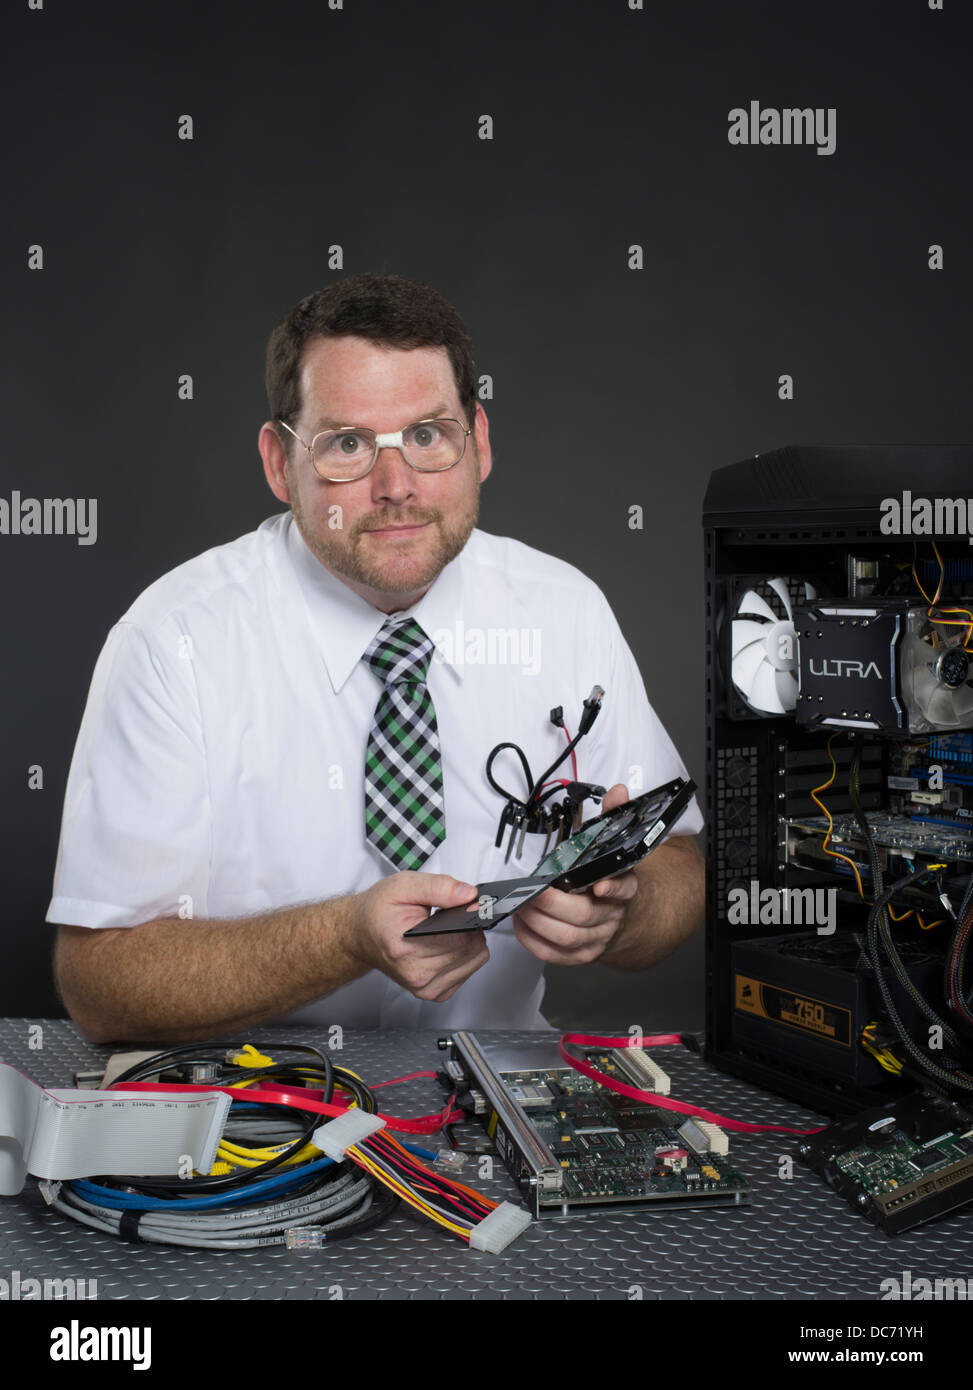 Man with computer and various hardware components Stock Photo